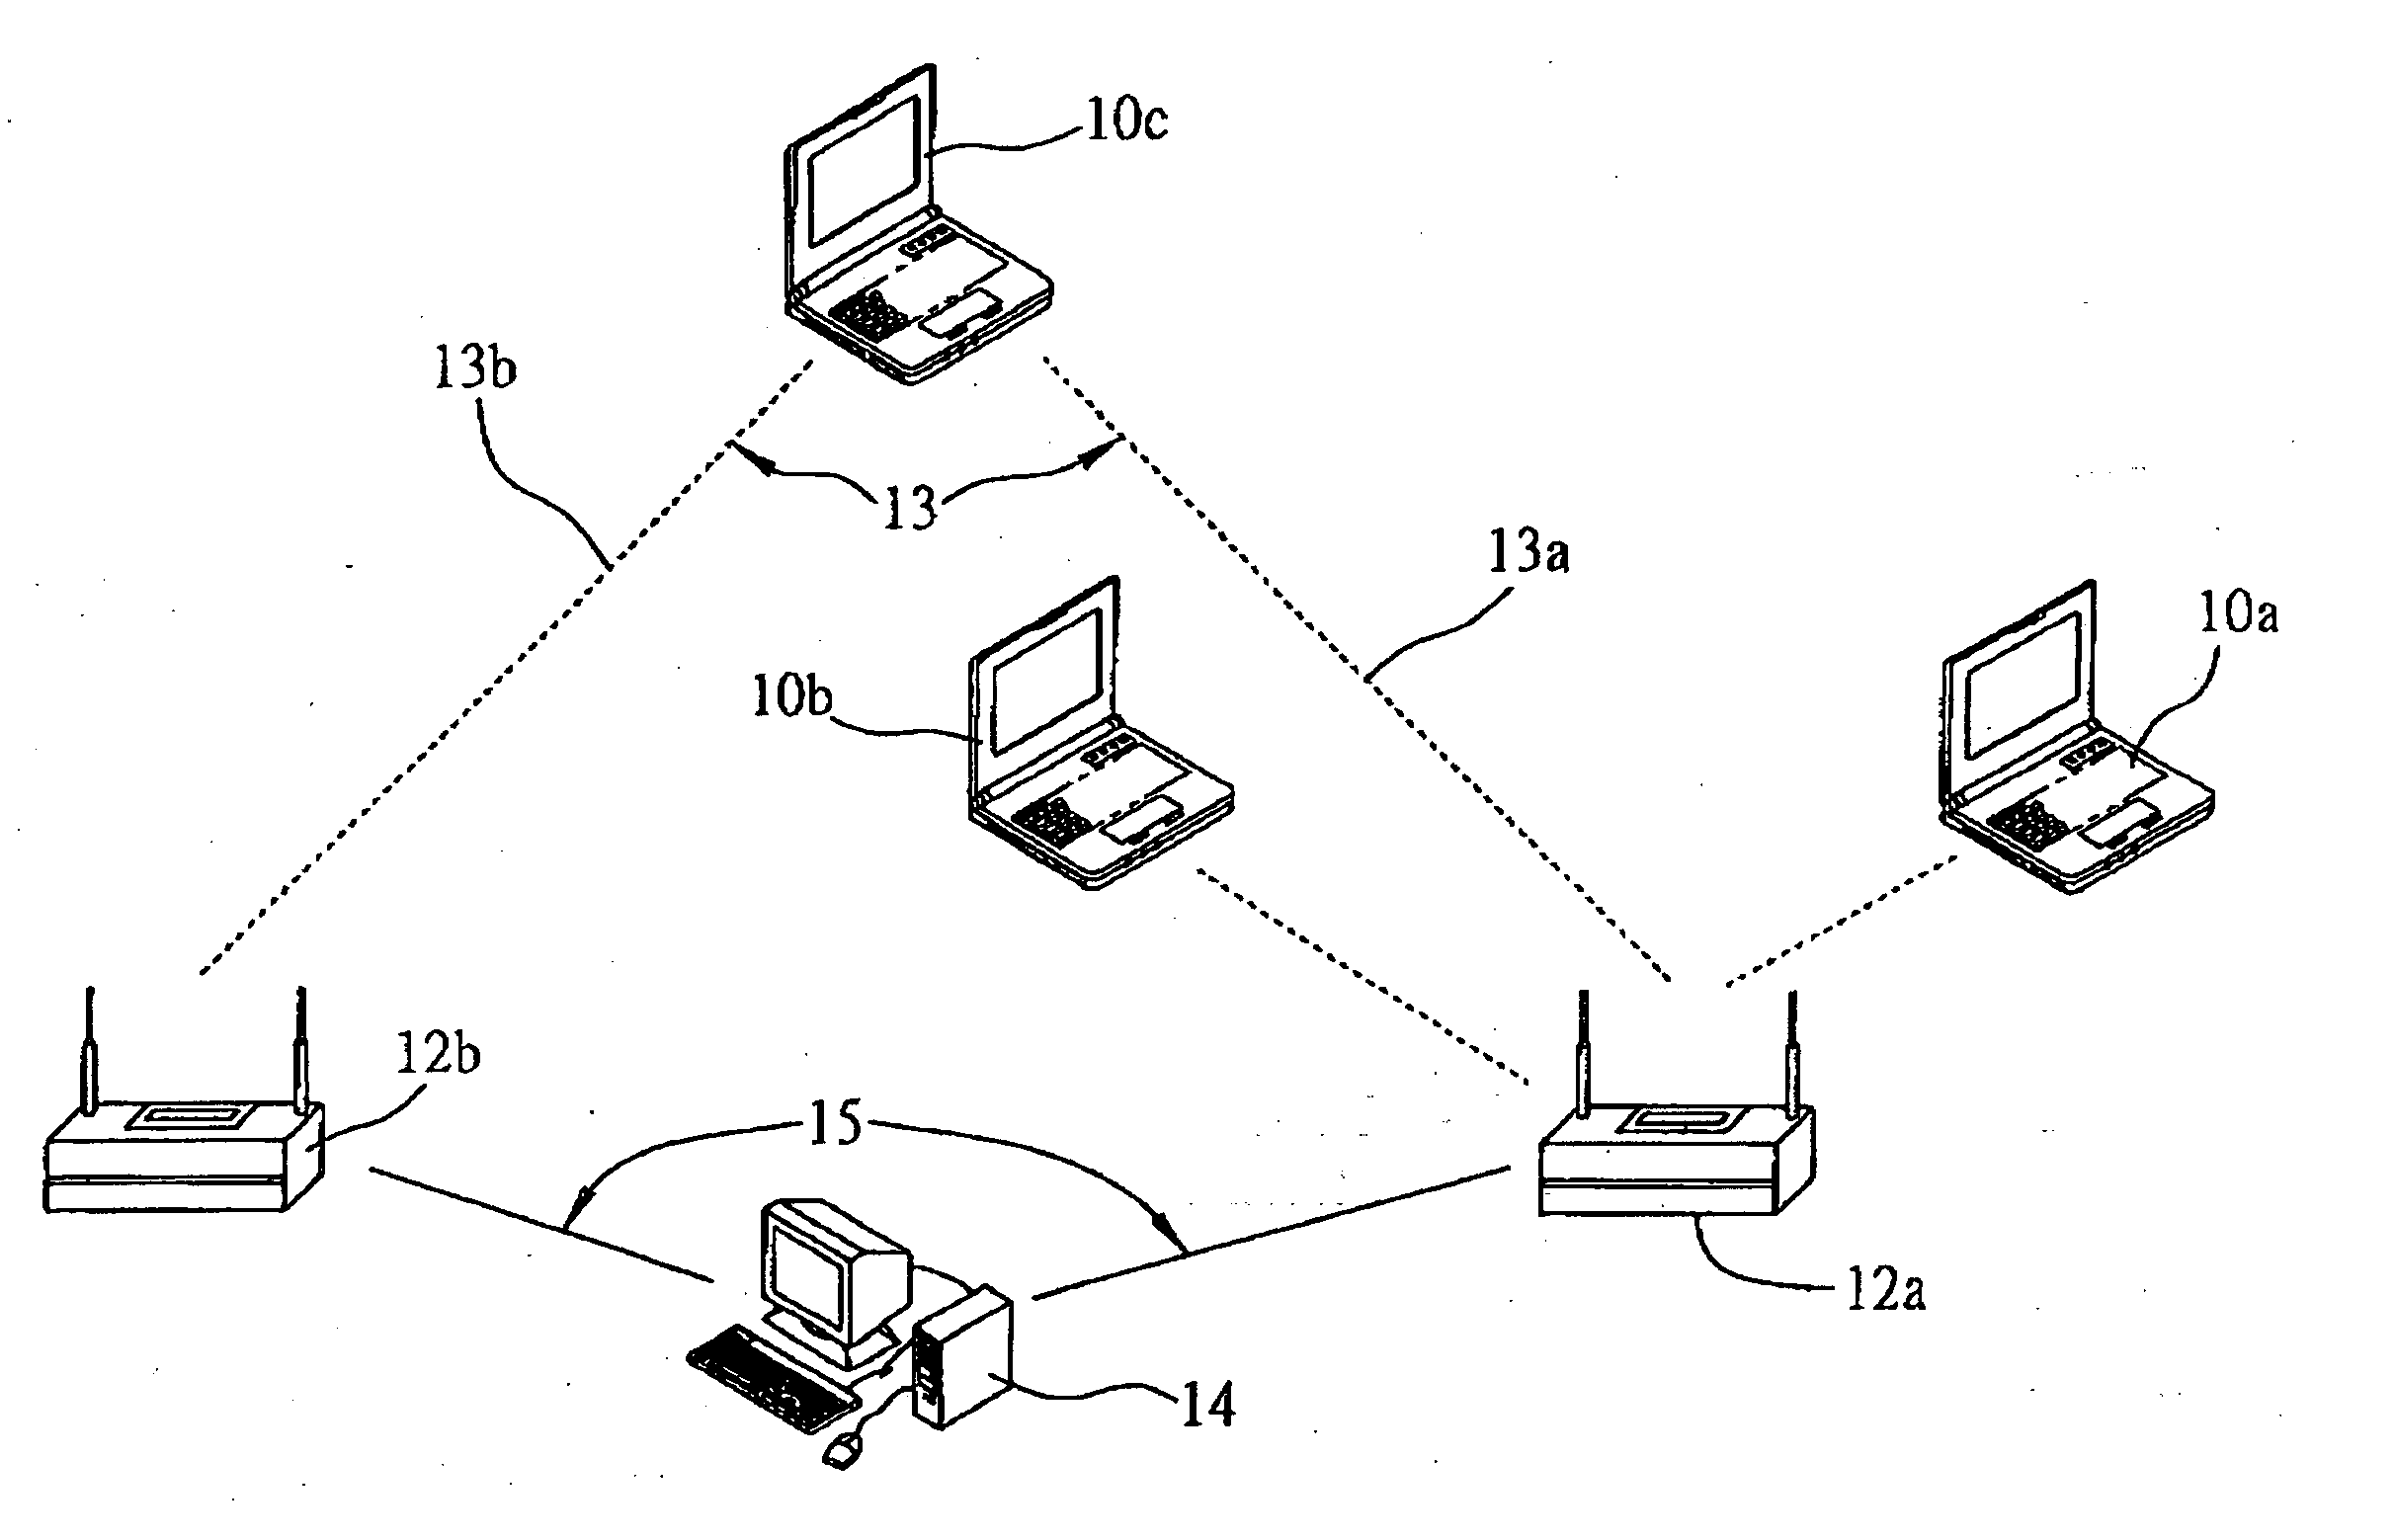 Dynamic network load balancing method and system